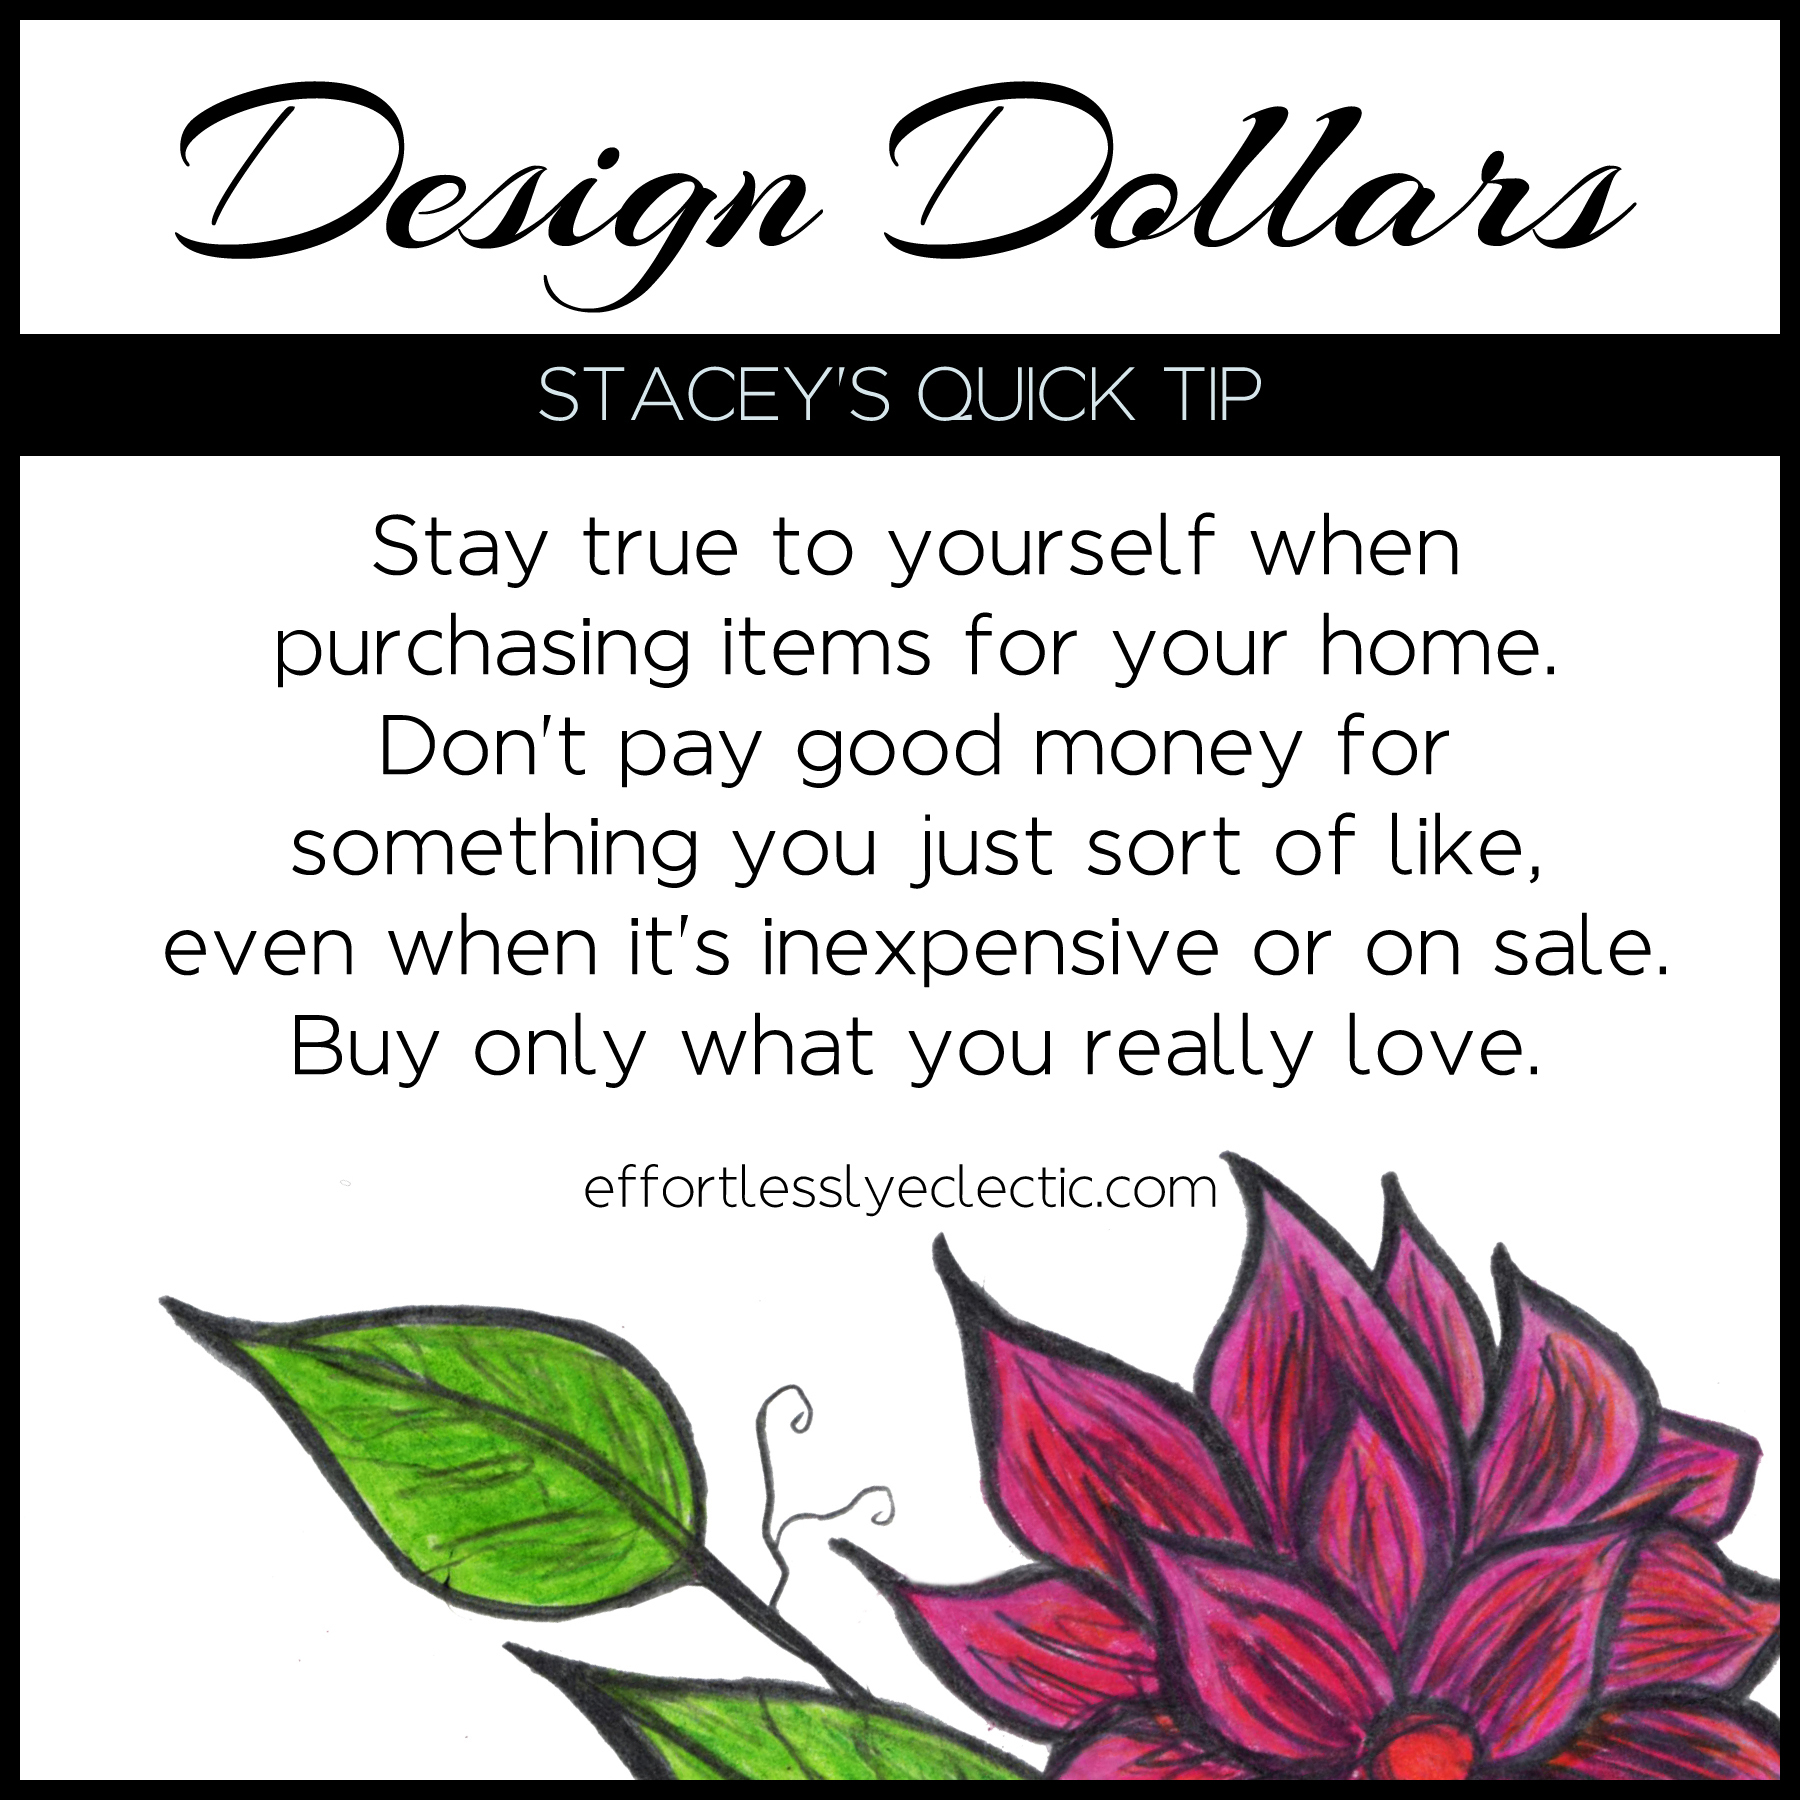 Design Dollars - A home decorating tip about how to choose decor